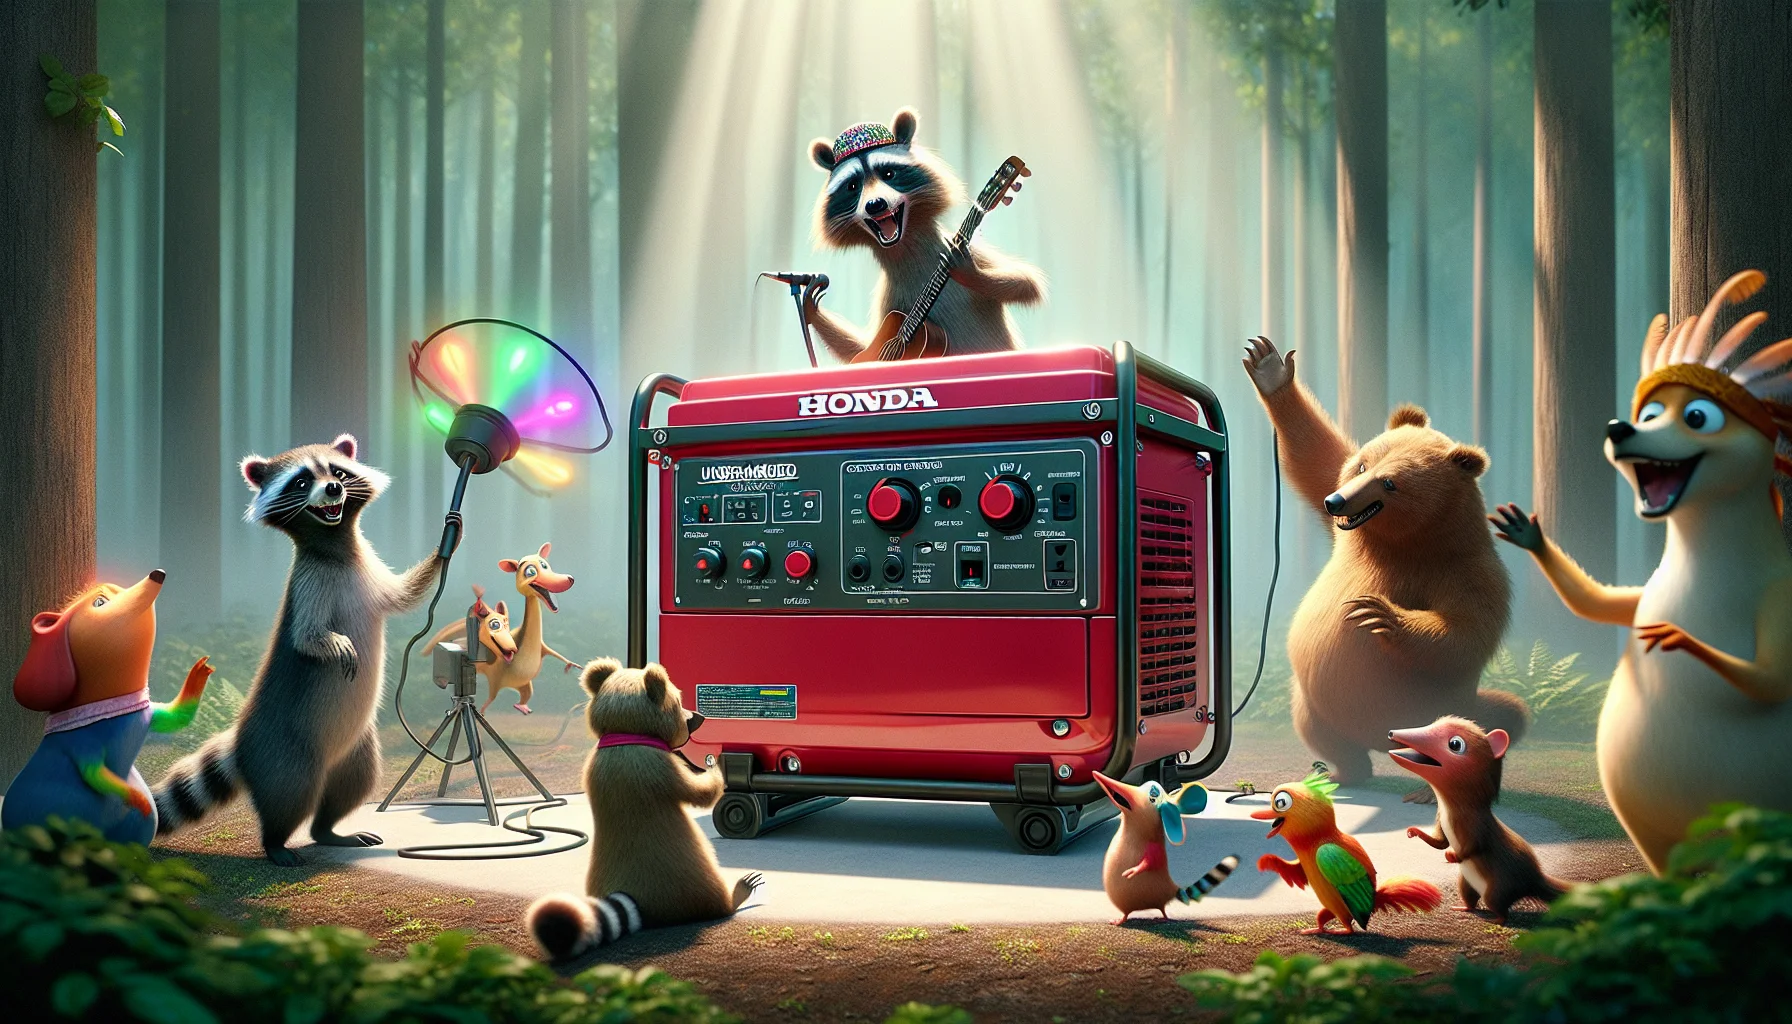 Imagine a humorous scenario featuring an unbranded, portable generator similar to the Honda EU3000is model. The generator is brilliantly red and compact, with control knobs and outlets exhibited prominently. An array of cartoon animals – a clever raccoon, a jolly bear, and a bird with an adorned feather cap – are trying to operate it in a flawlessly orchestrated teamwork. The scene is set in a serene forest, with light sunshine penetrating through the dense canopy. The animated creatures appear enthusiastic and inspired as they unwittingly instigate a mini disco in the woodlands, complete with multicolored lights, powered by the generator. Their comedic efforts aim to appeal to onlookers and promote the importance of generating electricity in a fun, engaging manner.